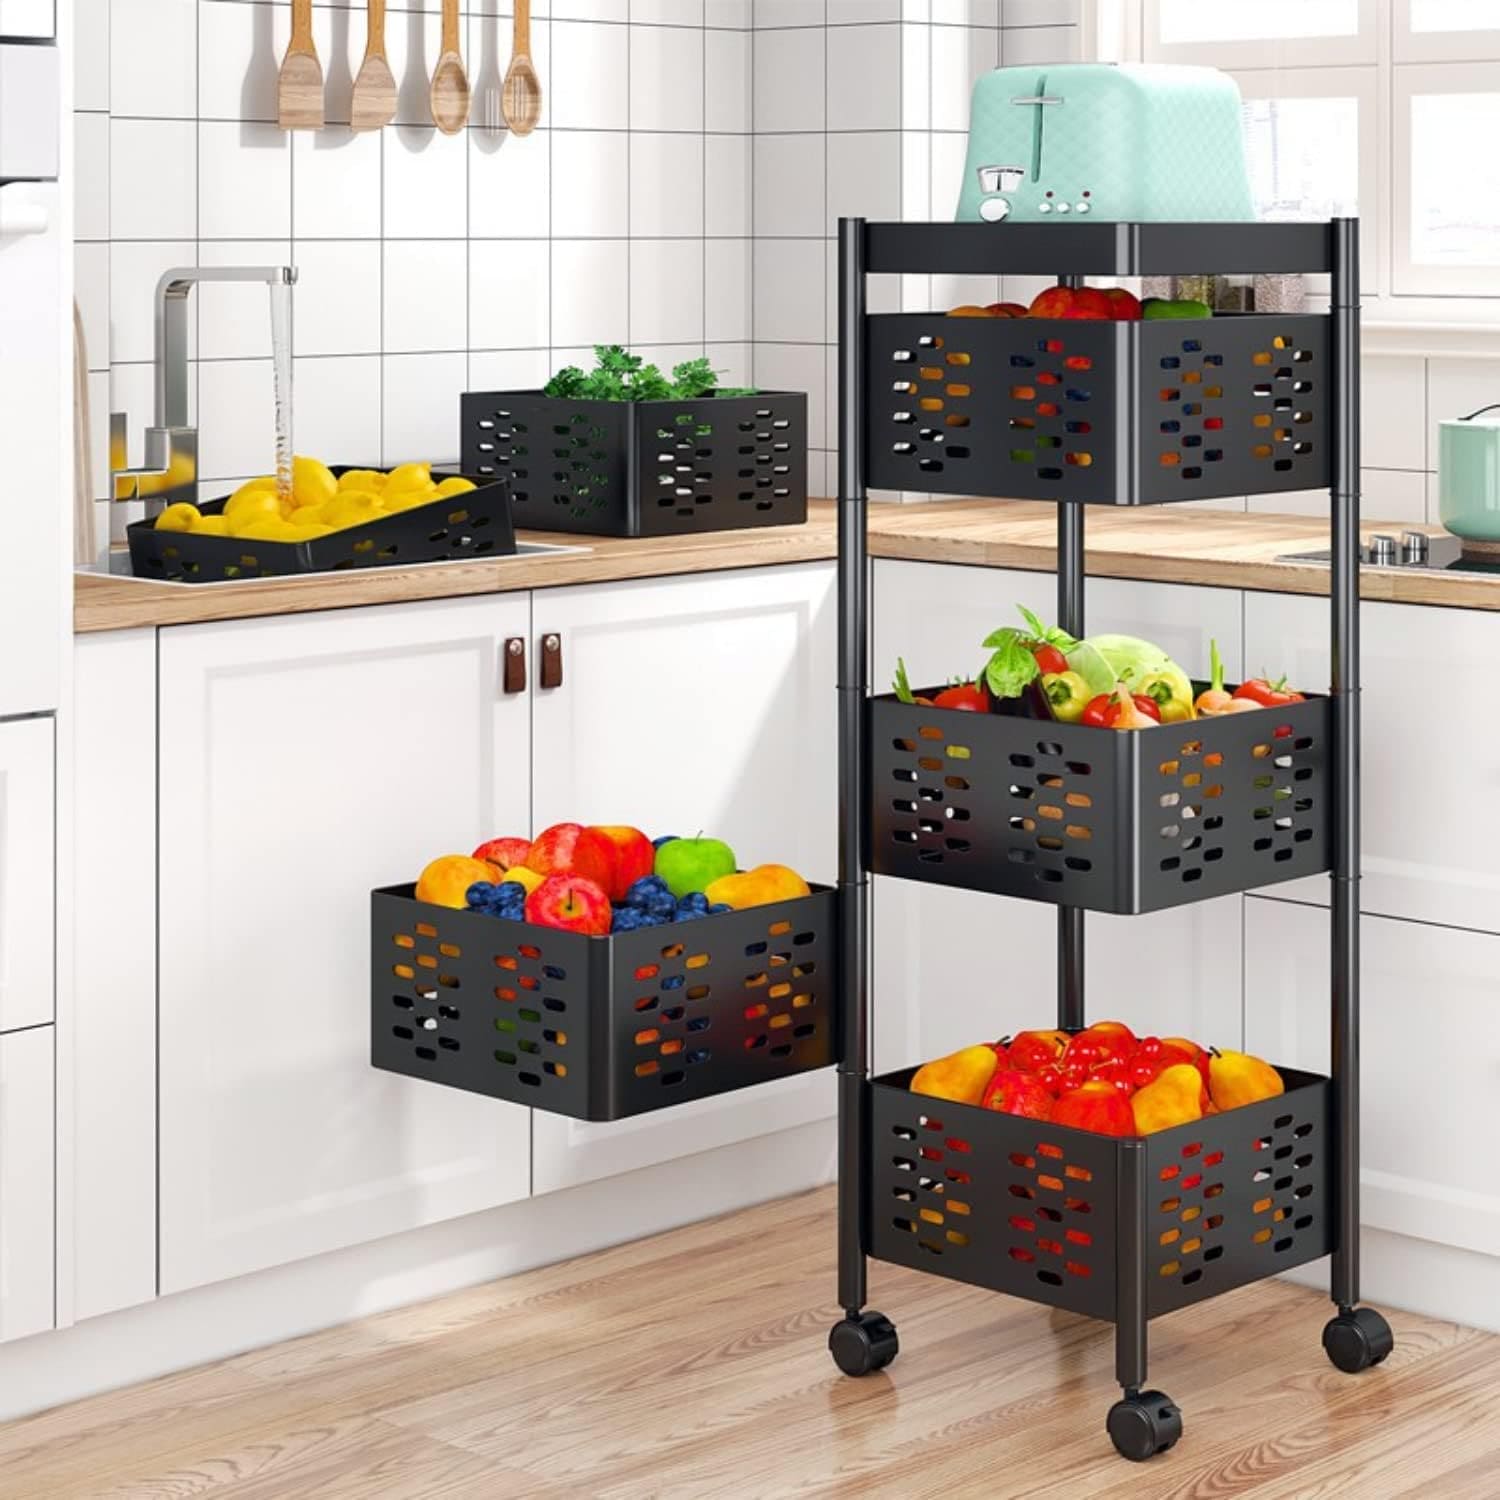 Square Multi Tier Rotating Storage Basket, 360° Rotating Fruit and Vegetable Stand, Kitchen Storage Rack with Mesh Baskets & Wheels, Mobile Kitchen Storage Fruit and Vegetable Holder